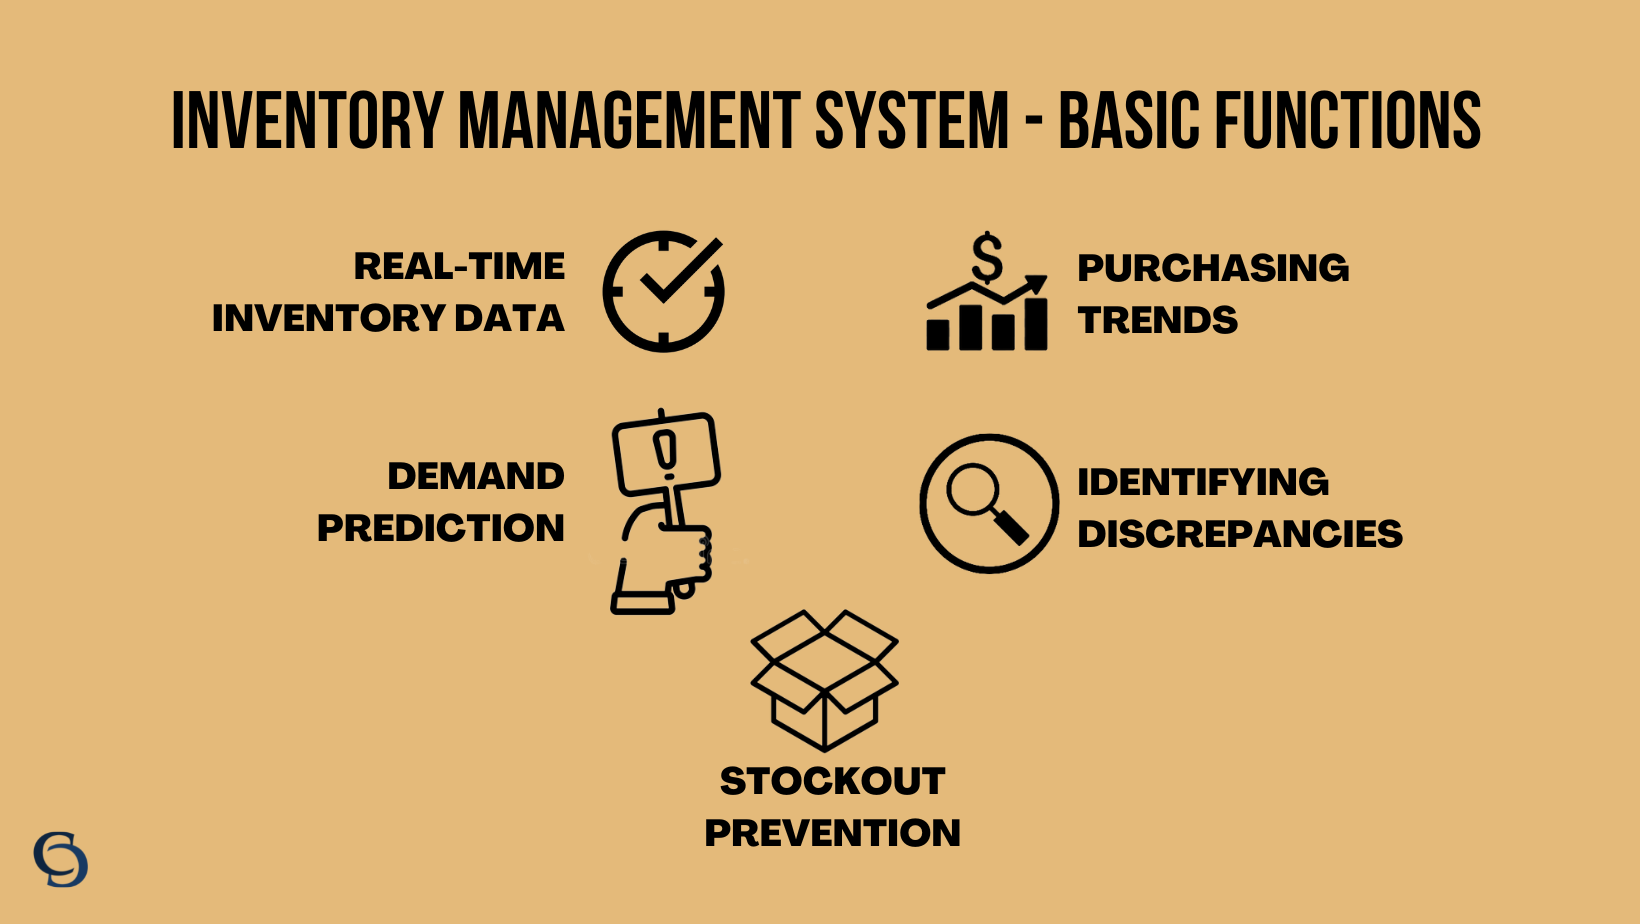 Functions of an Automated Inventory Management System